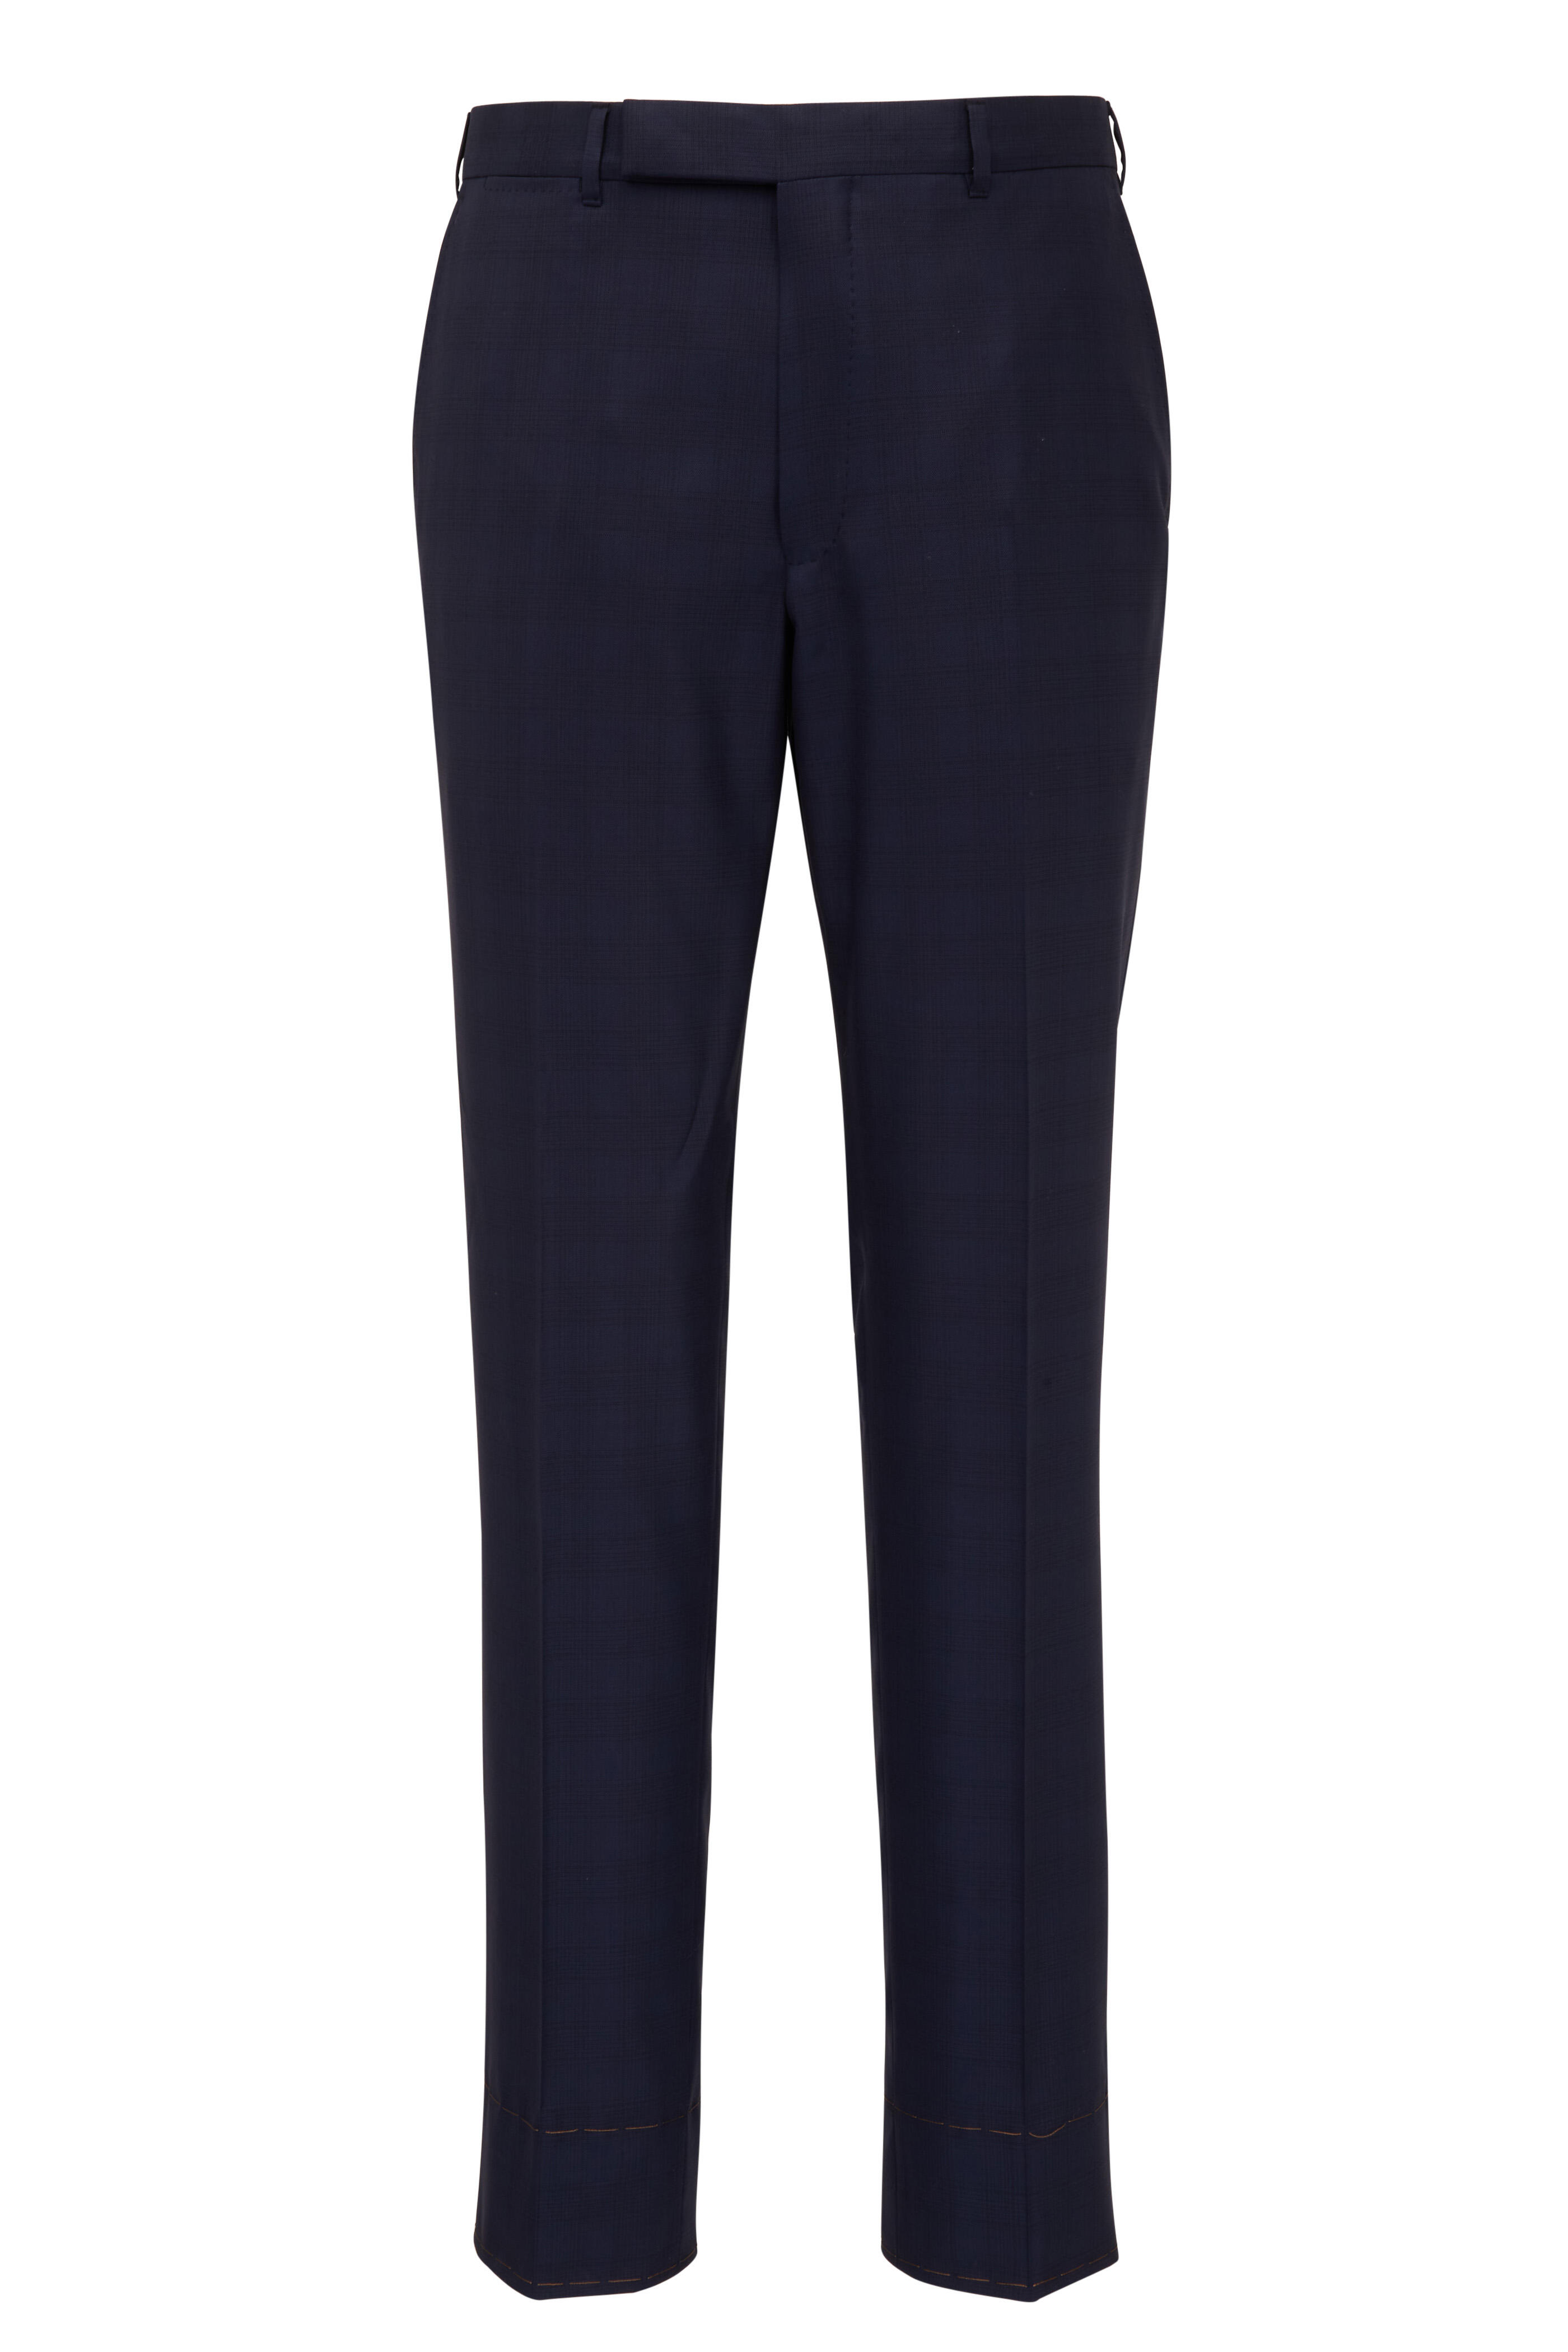 Zegna - Navy Blue Prince of Wales Centoventimila Wool Suit